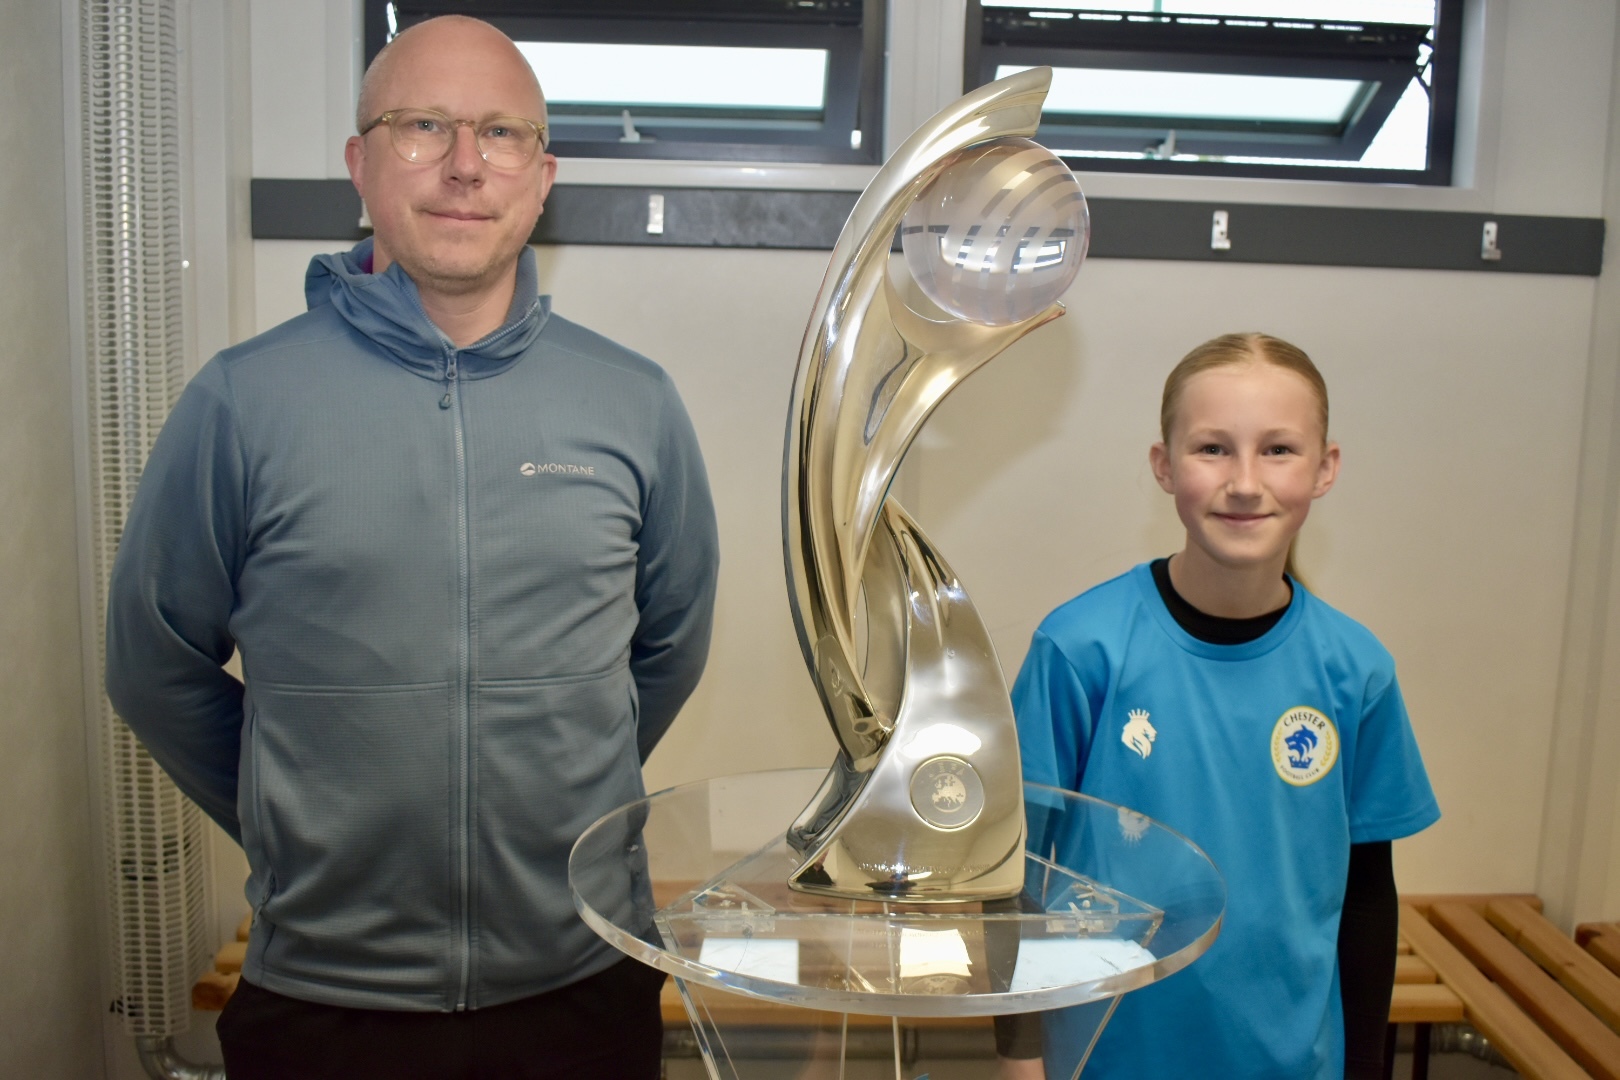 Players and families enjoyed their chance to be pictured with the Premier League trophy and the UEFA Womens Euro trophy at Chester FC Girls Emerging Talent Centre.